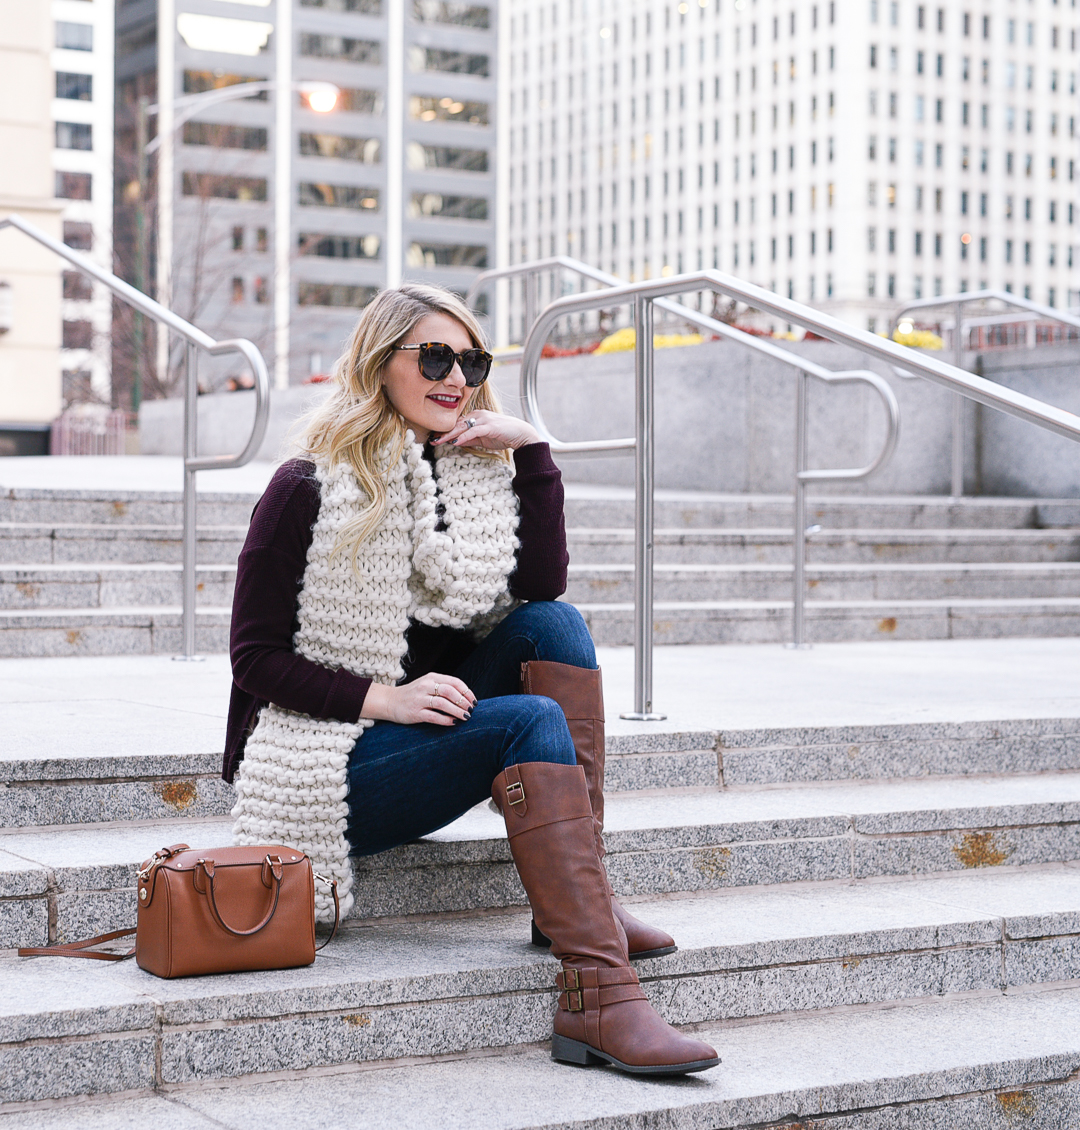 Jenna Colgrove wearing Payless riding boots, a lush burgundy sweater, and a Coach satchel bag.